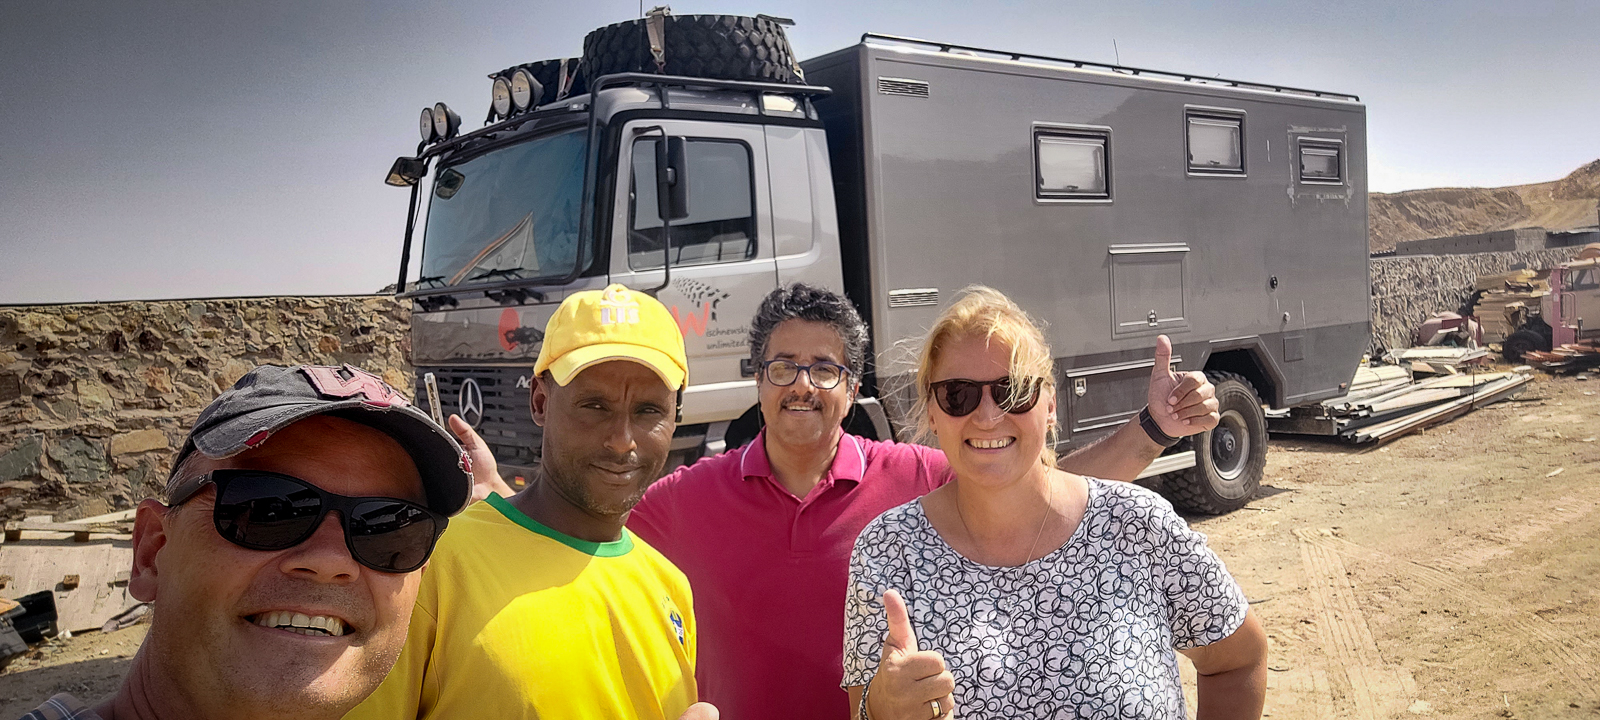 <span  class="uc_style_uc_tiles_grid_image_elementor_uc_items_attribute_title" style="color:#ffffff;">new friends and big helpers: Abdul and Fayez from Jeddah (there we could leave our truck for 3 months) --&gt; thanks!!</span>